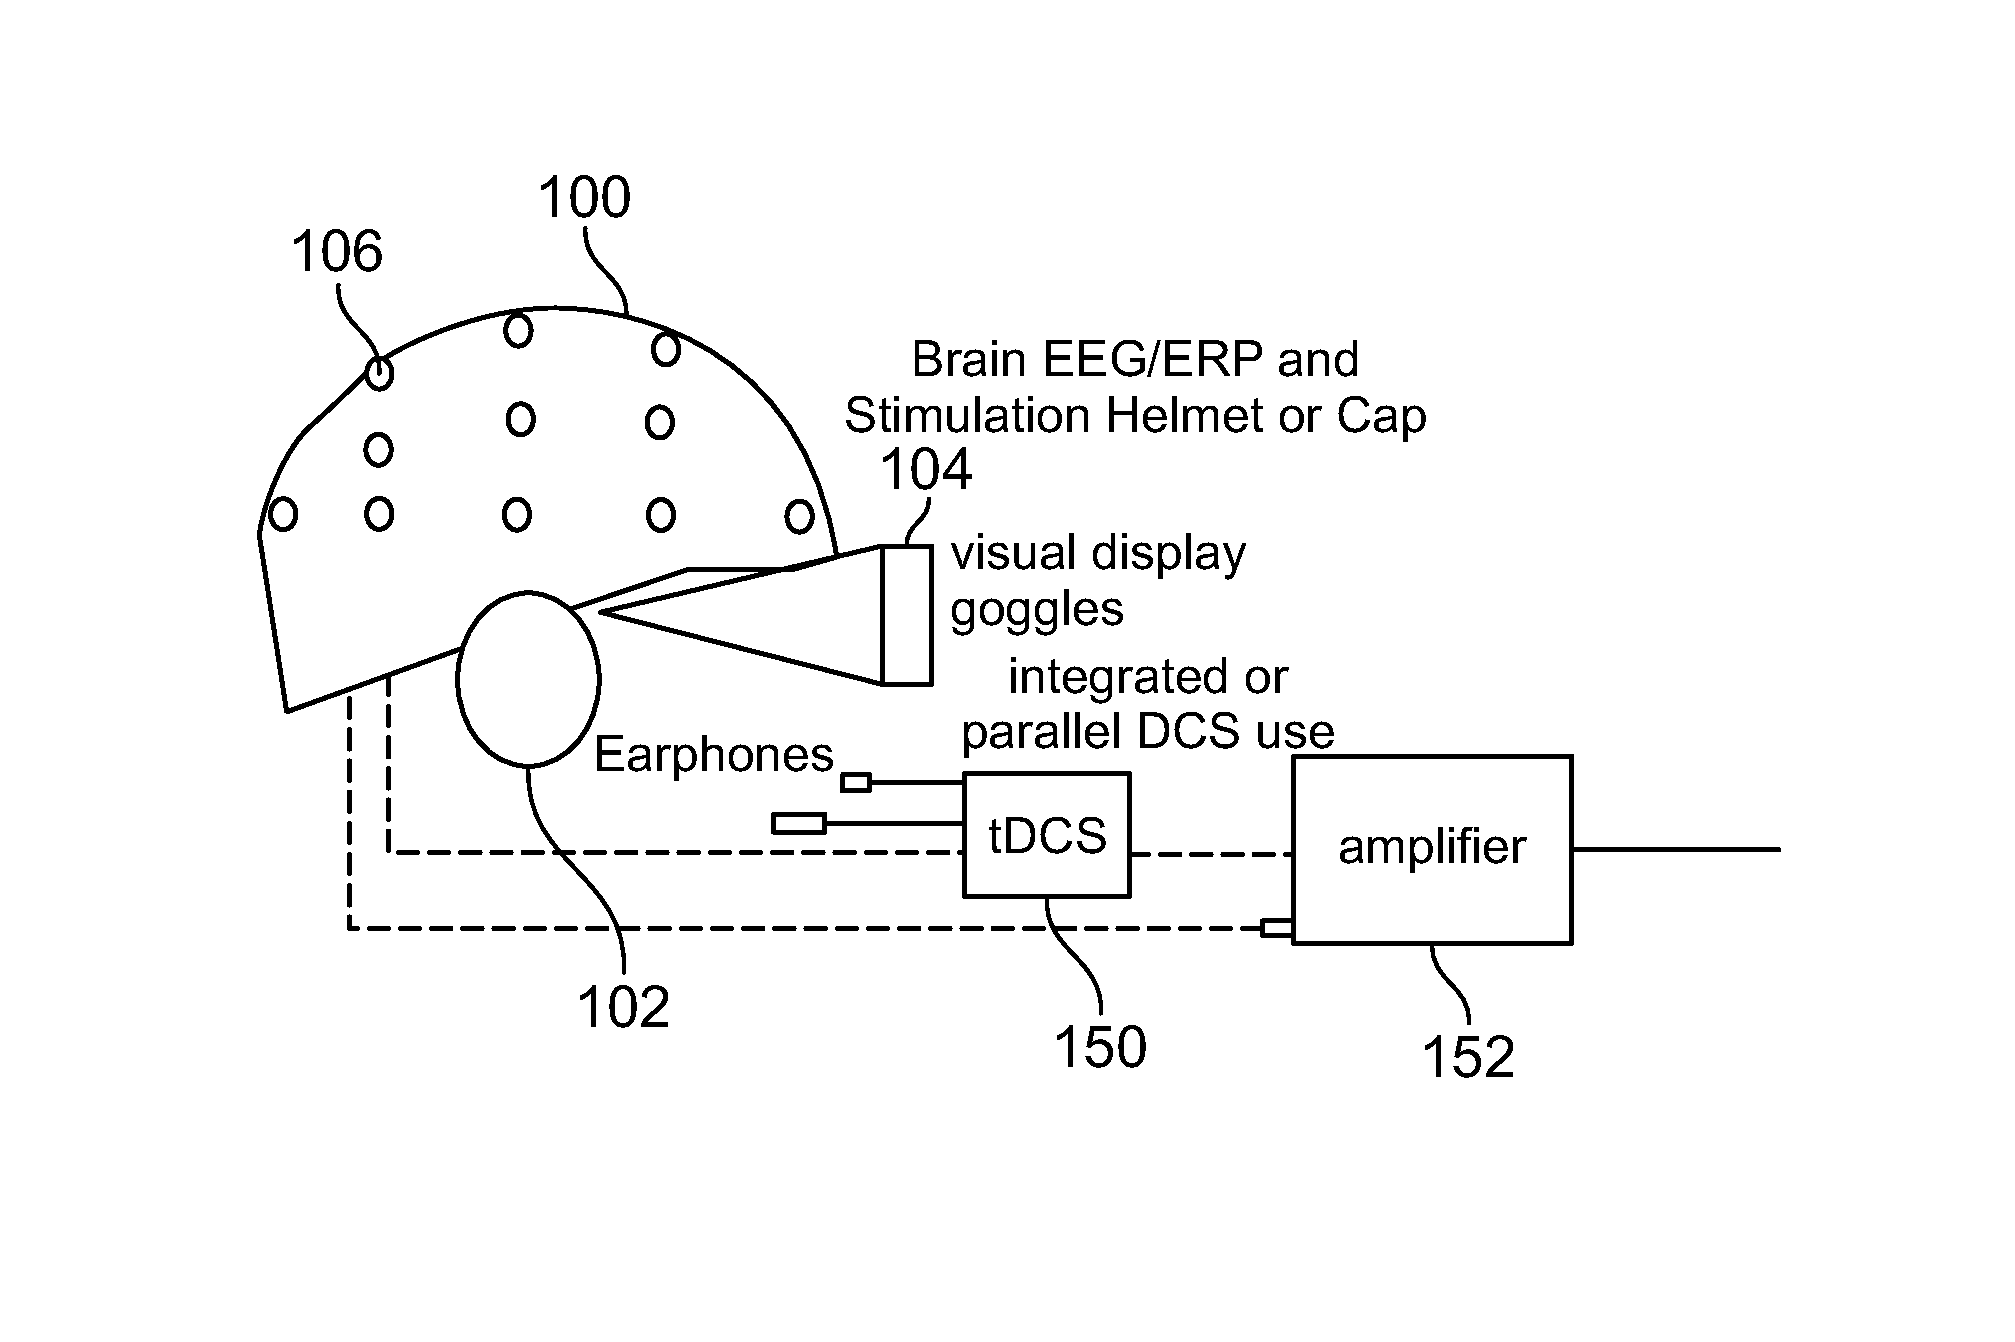 Headgear with displaceable sensors for electrophysiology measurement and training